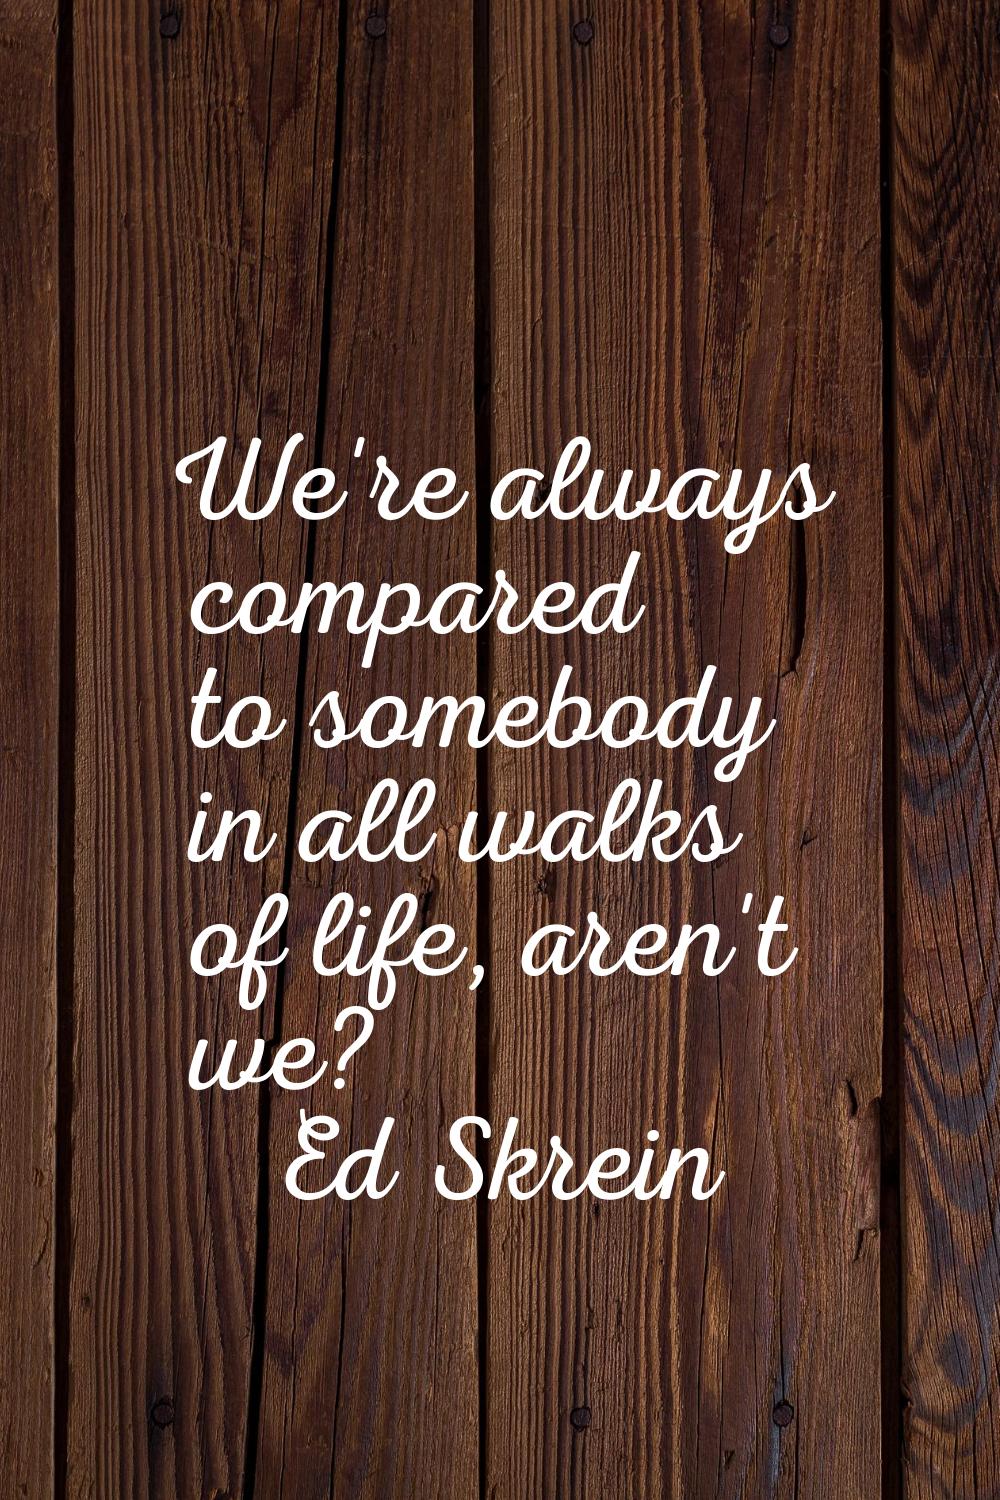 We're always compared to somebody in all walks of life, aren't we?